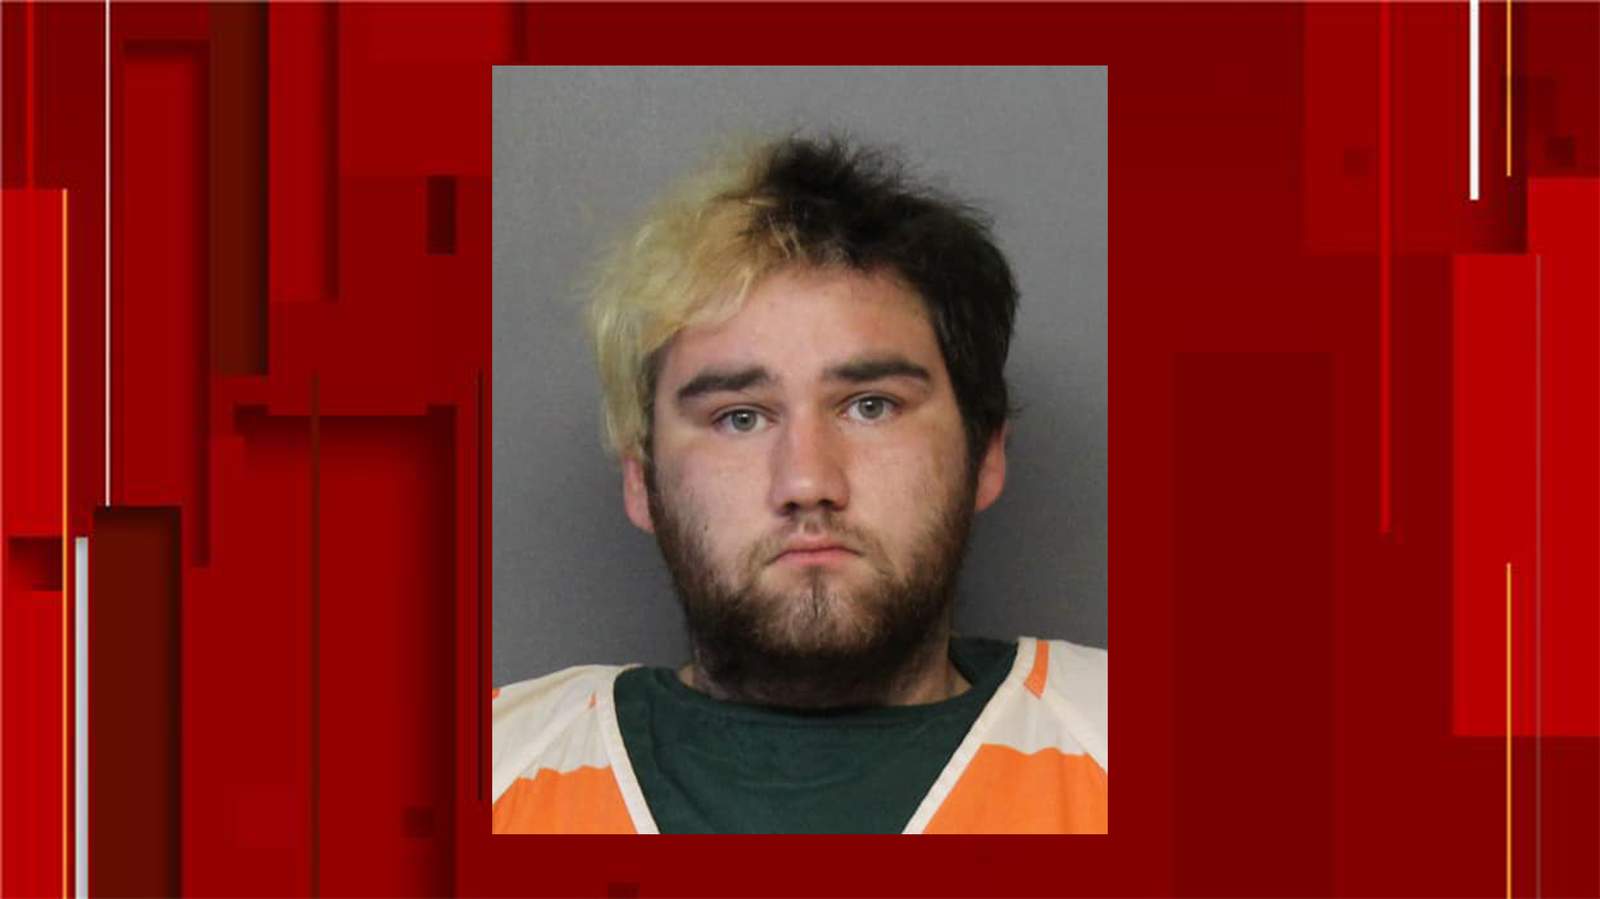 Man arrested after woman fatally shot at Texas Renaissance Festival campgrounds, officials say